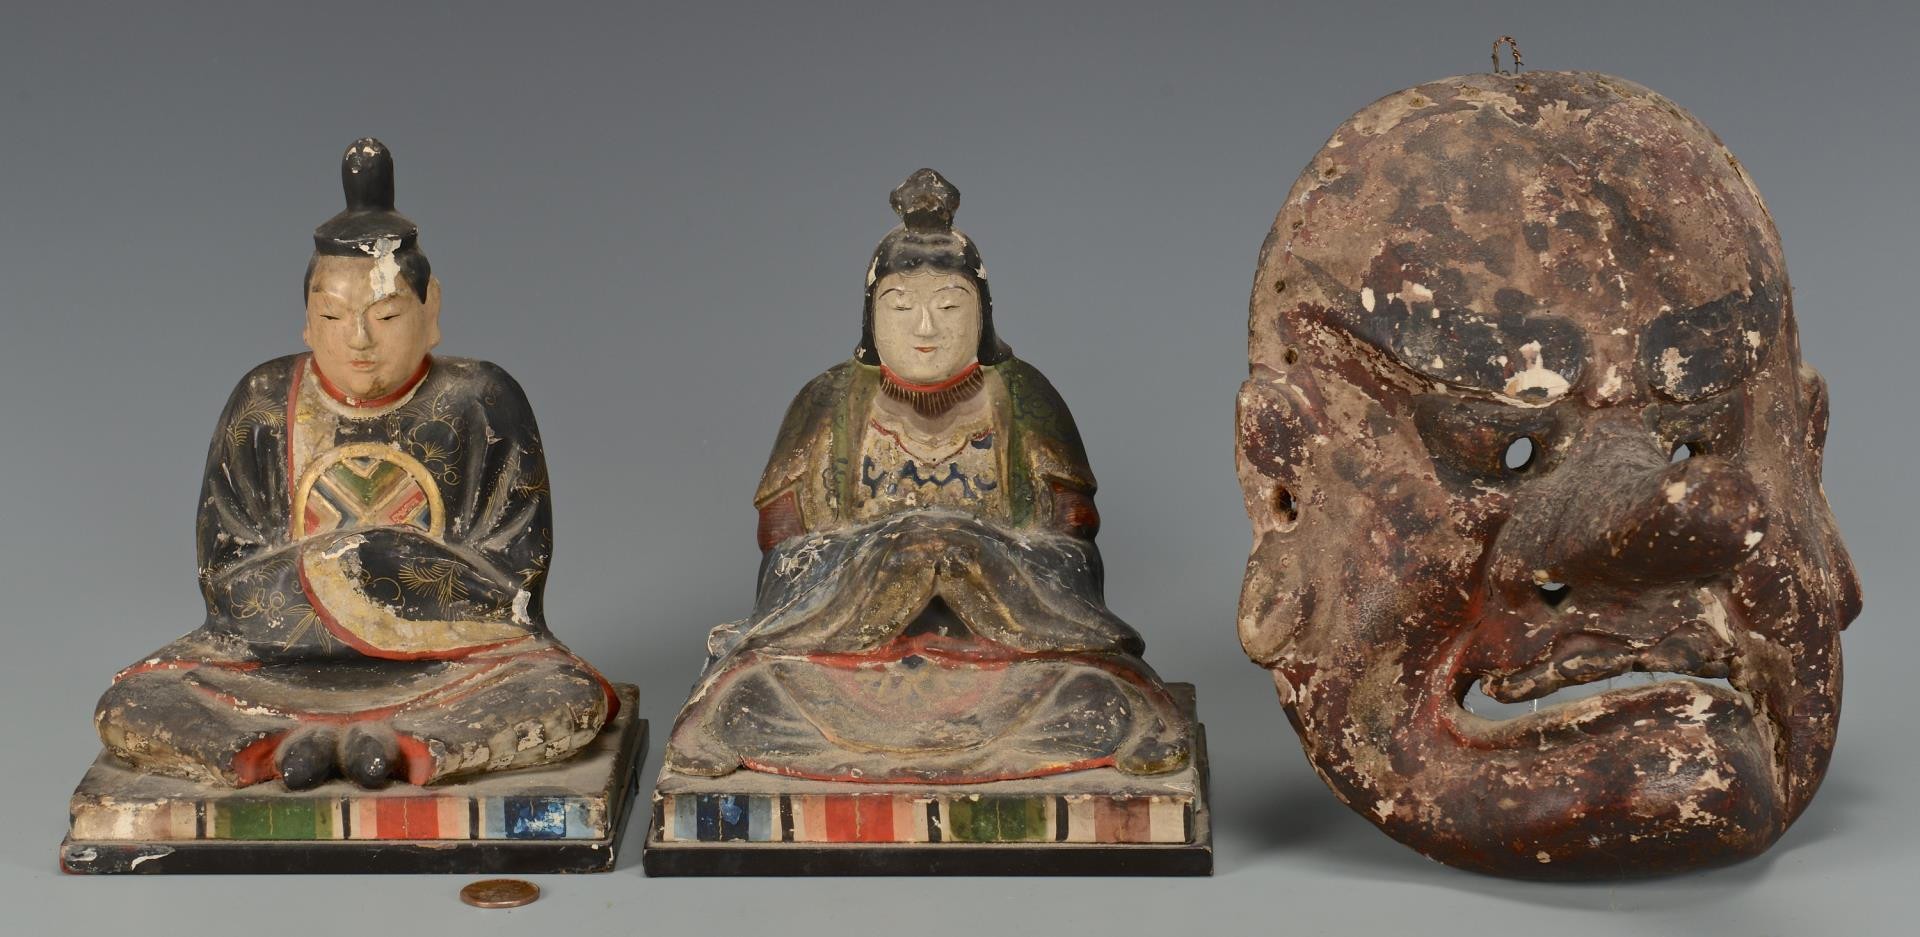 Lot 724: Asian Carved & Painted Items, 5 pcs.